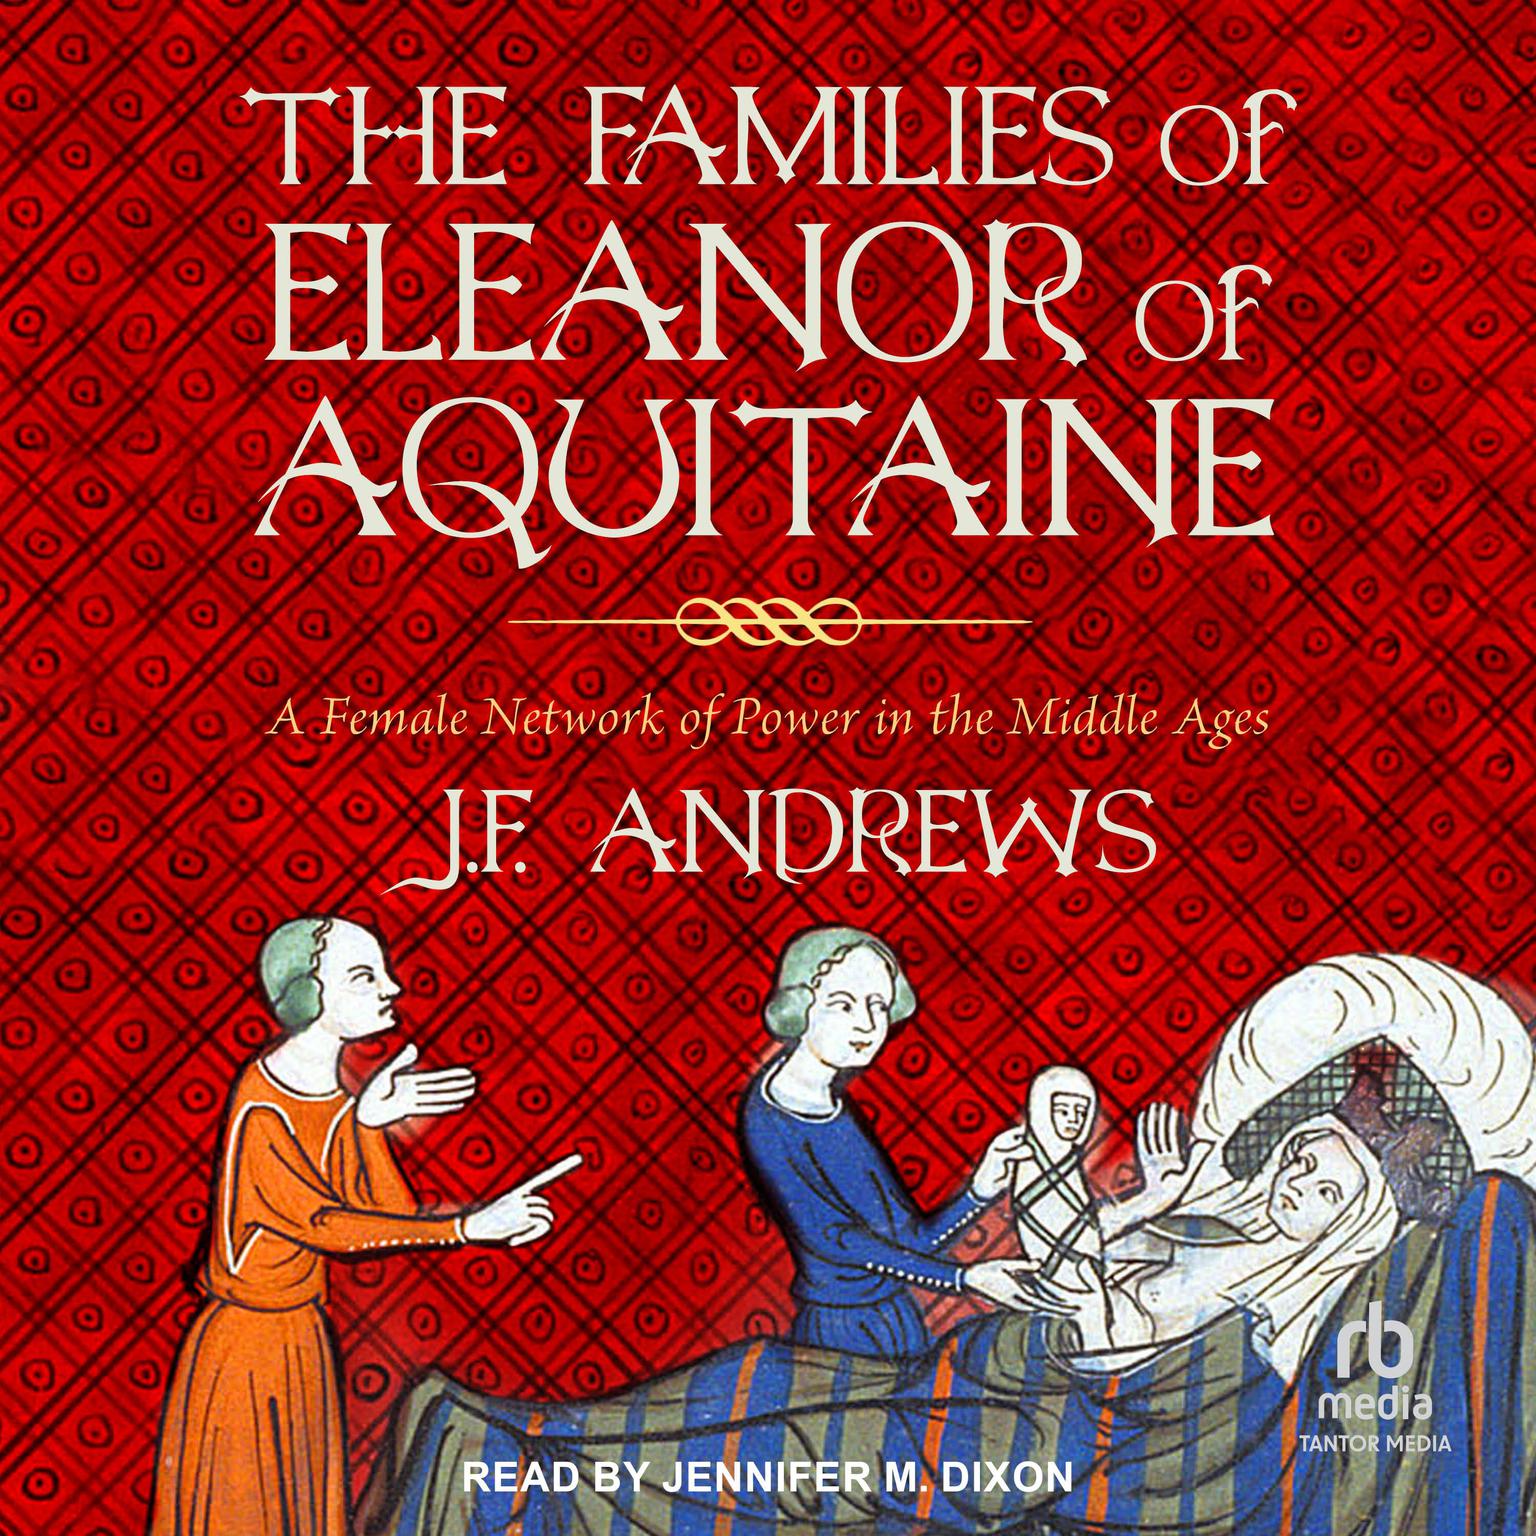 The Families of Eleanor of Aquitaine: A Female Network of Power in the Middle Ages Audiobook, by J. F. Andrews